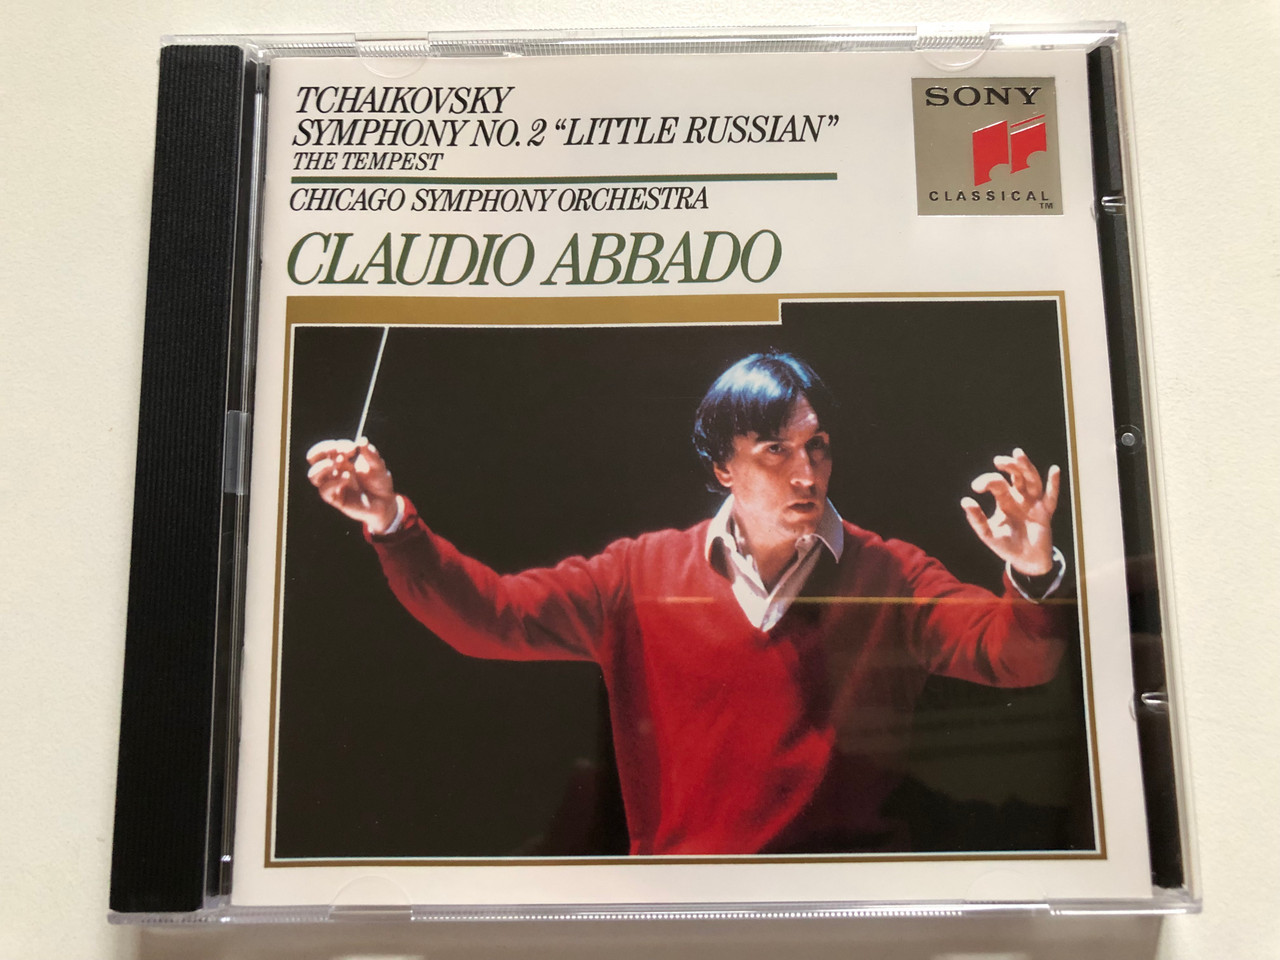 https://cdn10.bigcommerce.com/s-62bdpkt7pb/products/0/images/313093/Tchaikovsky_-_Symphony_No._2_in_C_minor_Op17_Little_Russian_The_Tempest_-_Chicago_Symphony_Orchestra_Claudio_Abbado_Sony_Classical_Audio_CD_1992_SK_39_359_1__15445.1700489945.1280.1280.JPG?c=2